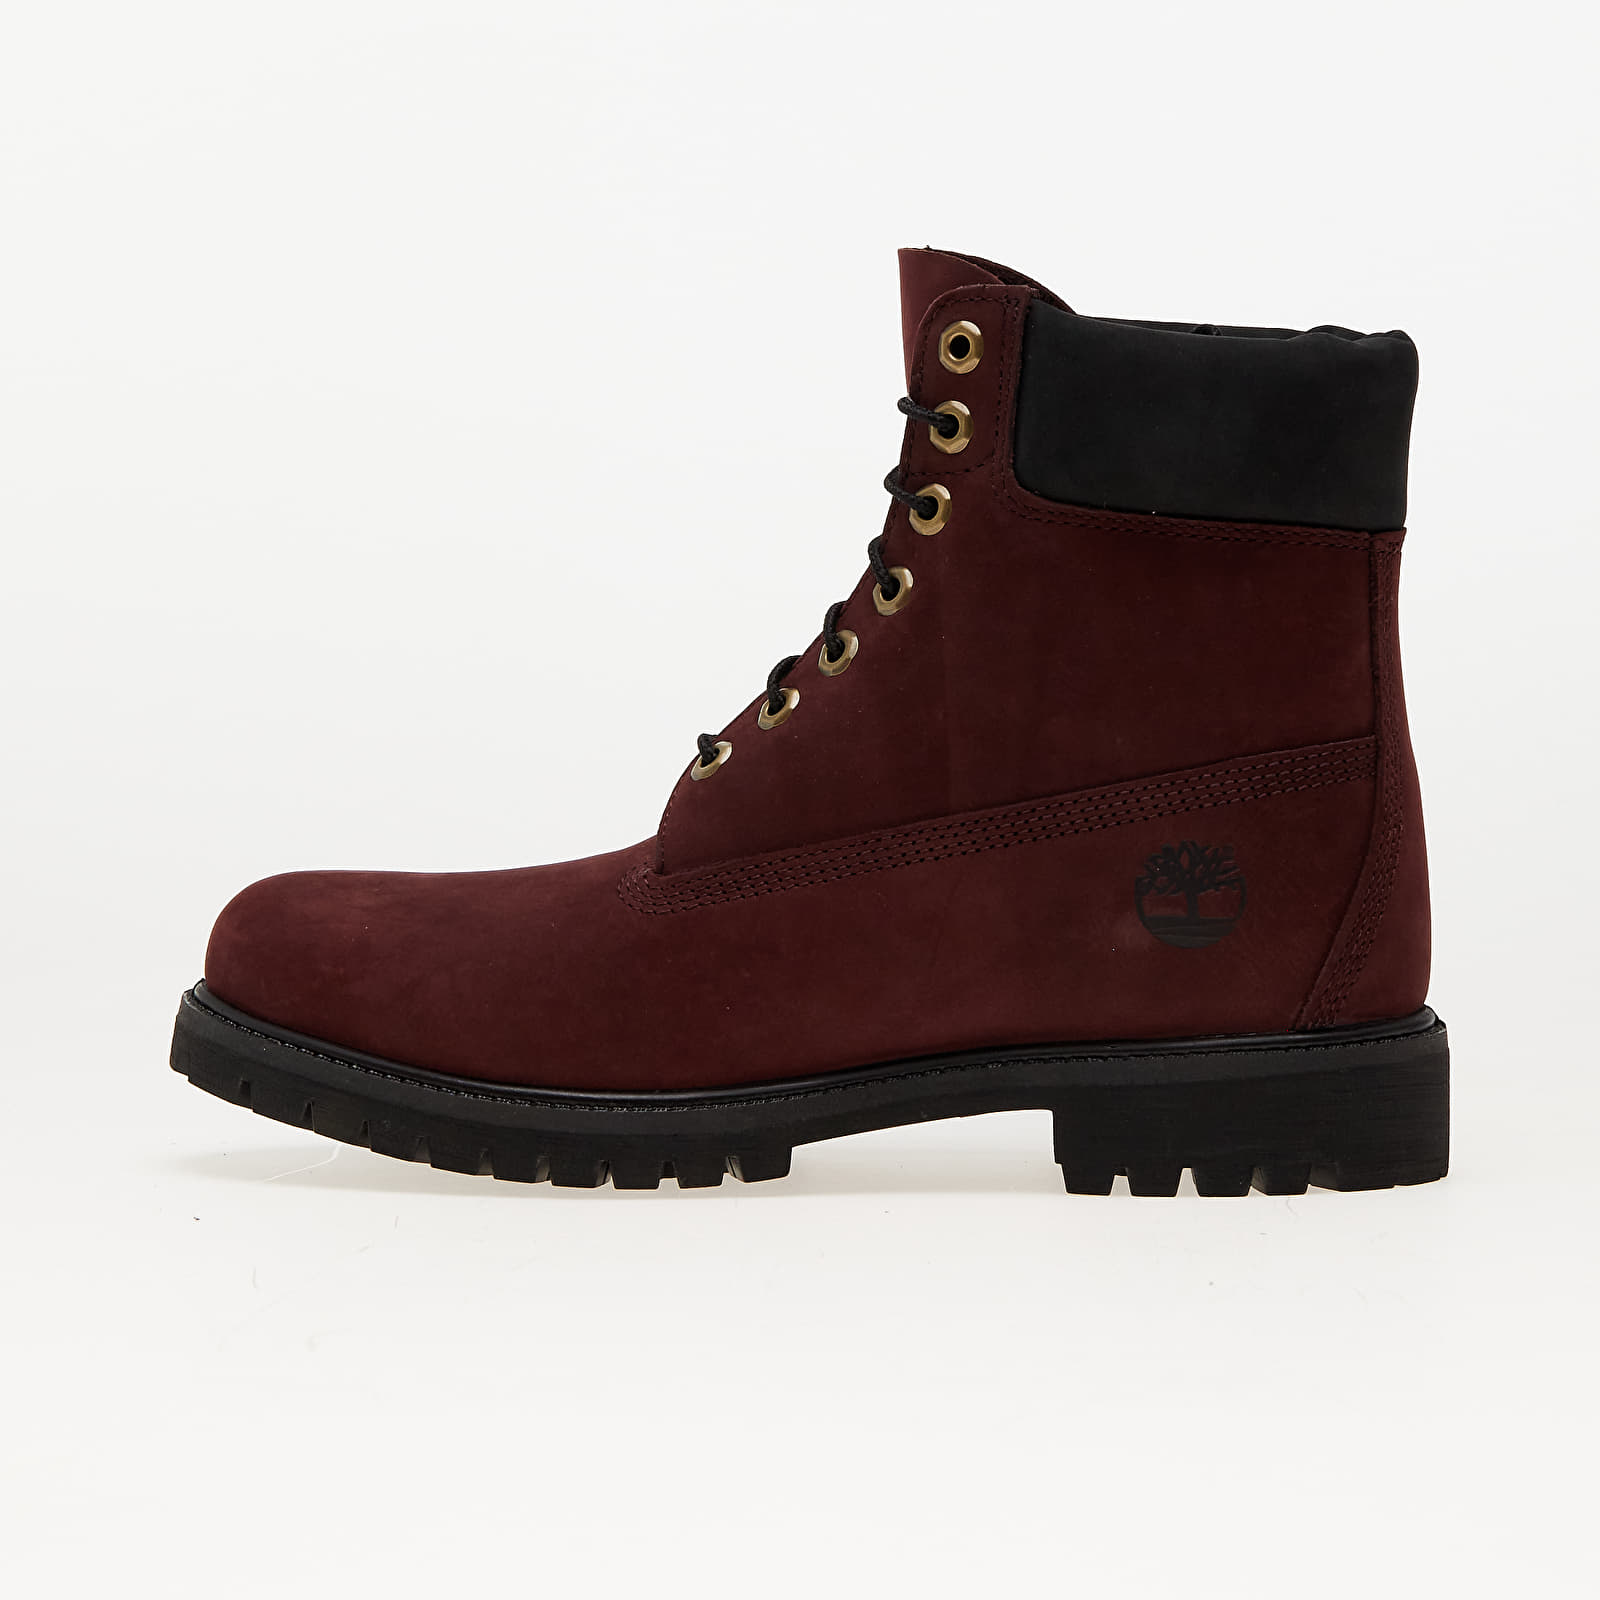 Men's shoes Timberland 6 Inch Lace Up Waterproof Boot Burgundy